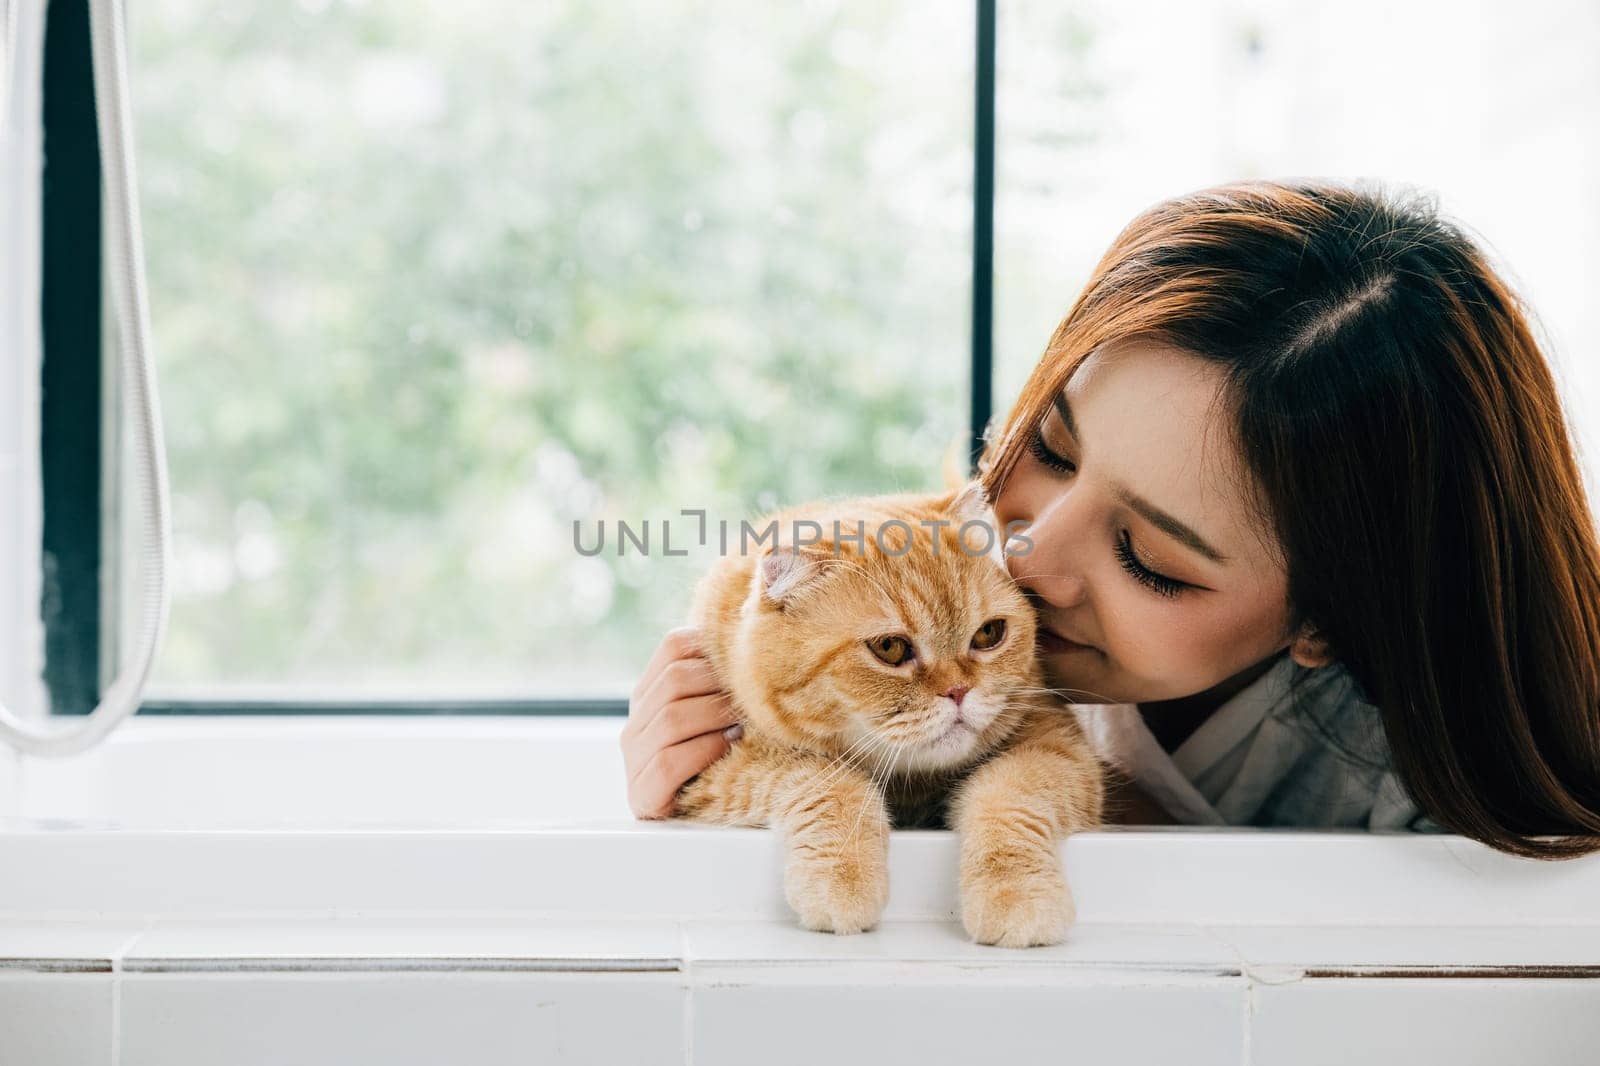 A beautiful bathroom portrait, An adult woman finds happiness in her bath as she holds her Scottish Fold cat, a perfect blend of owner-pet love and peaceful solitude. by Sorapop